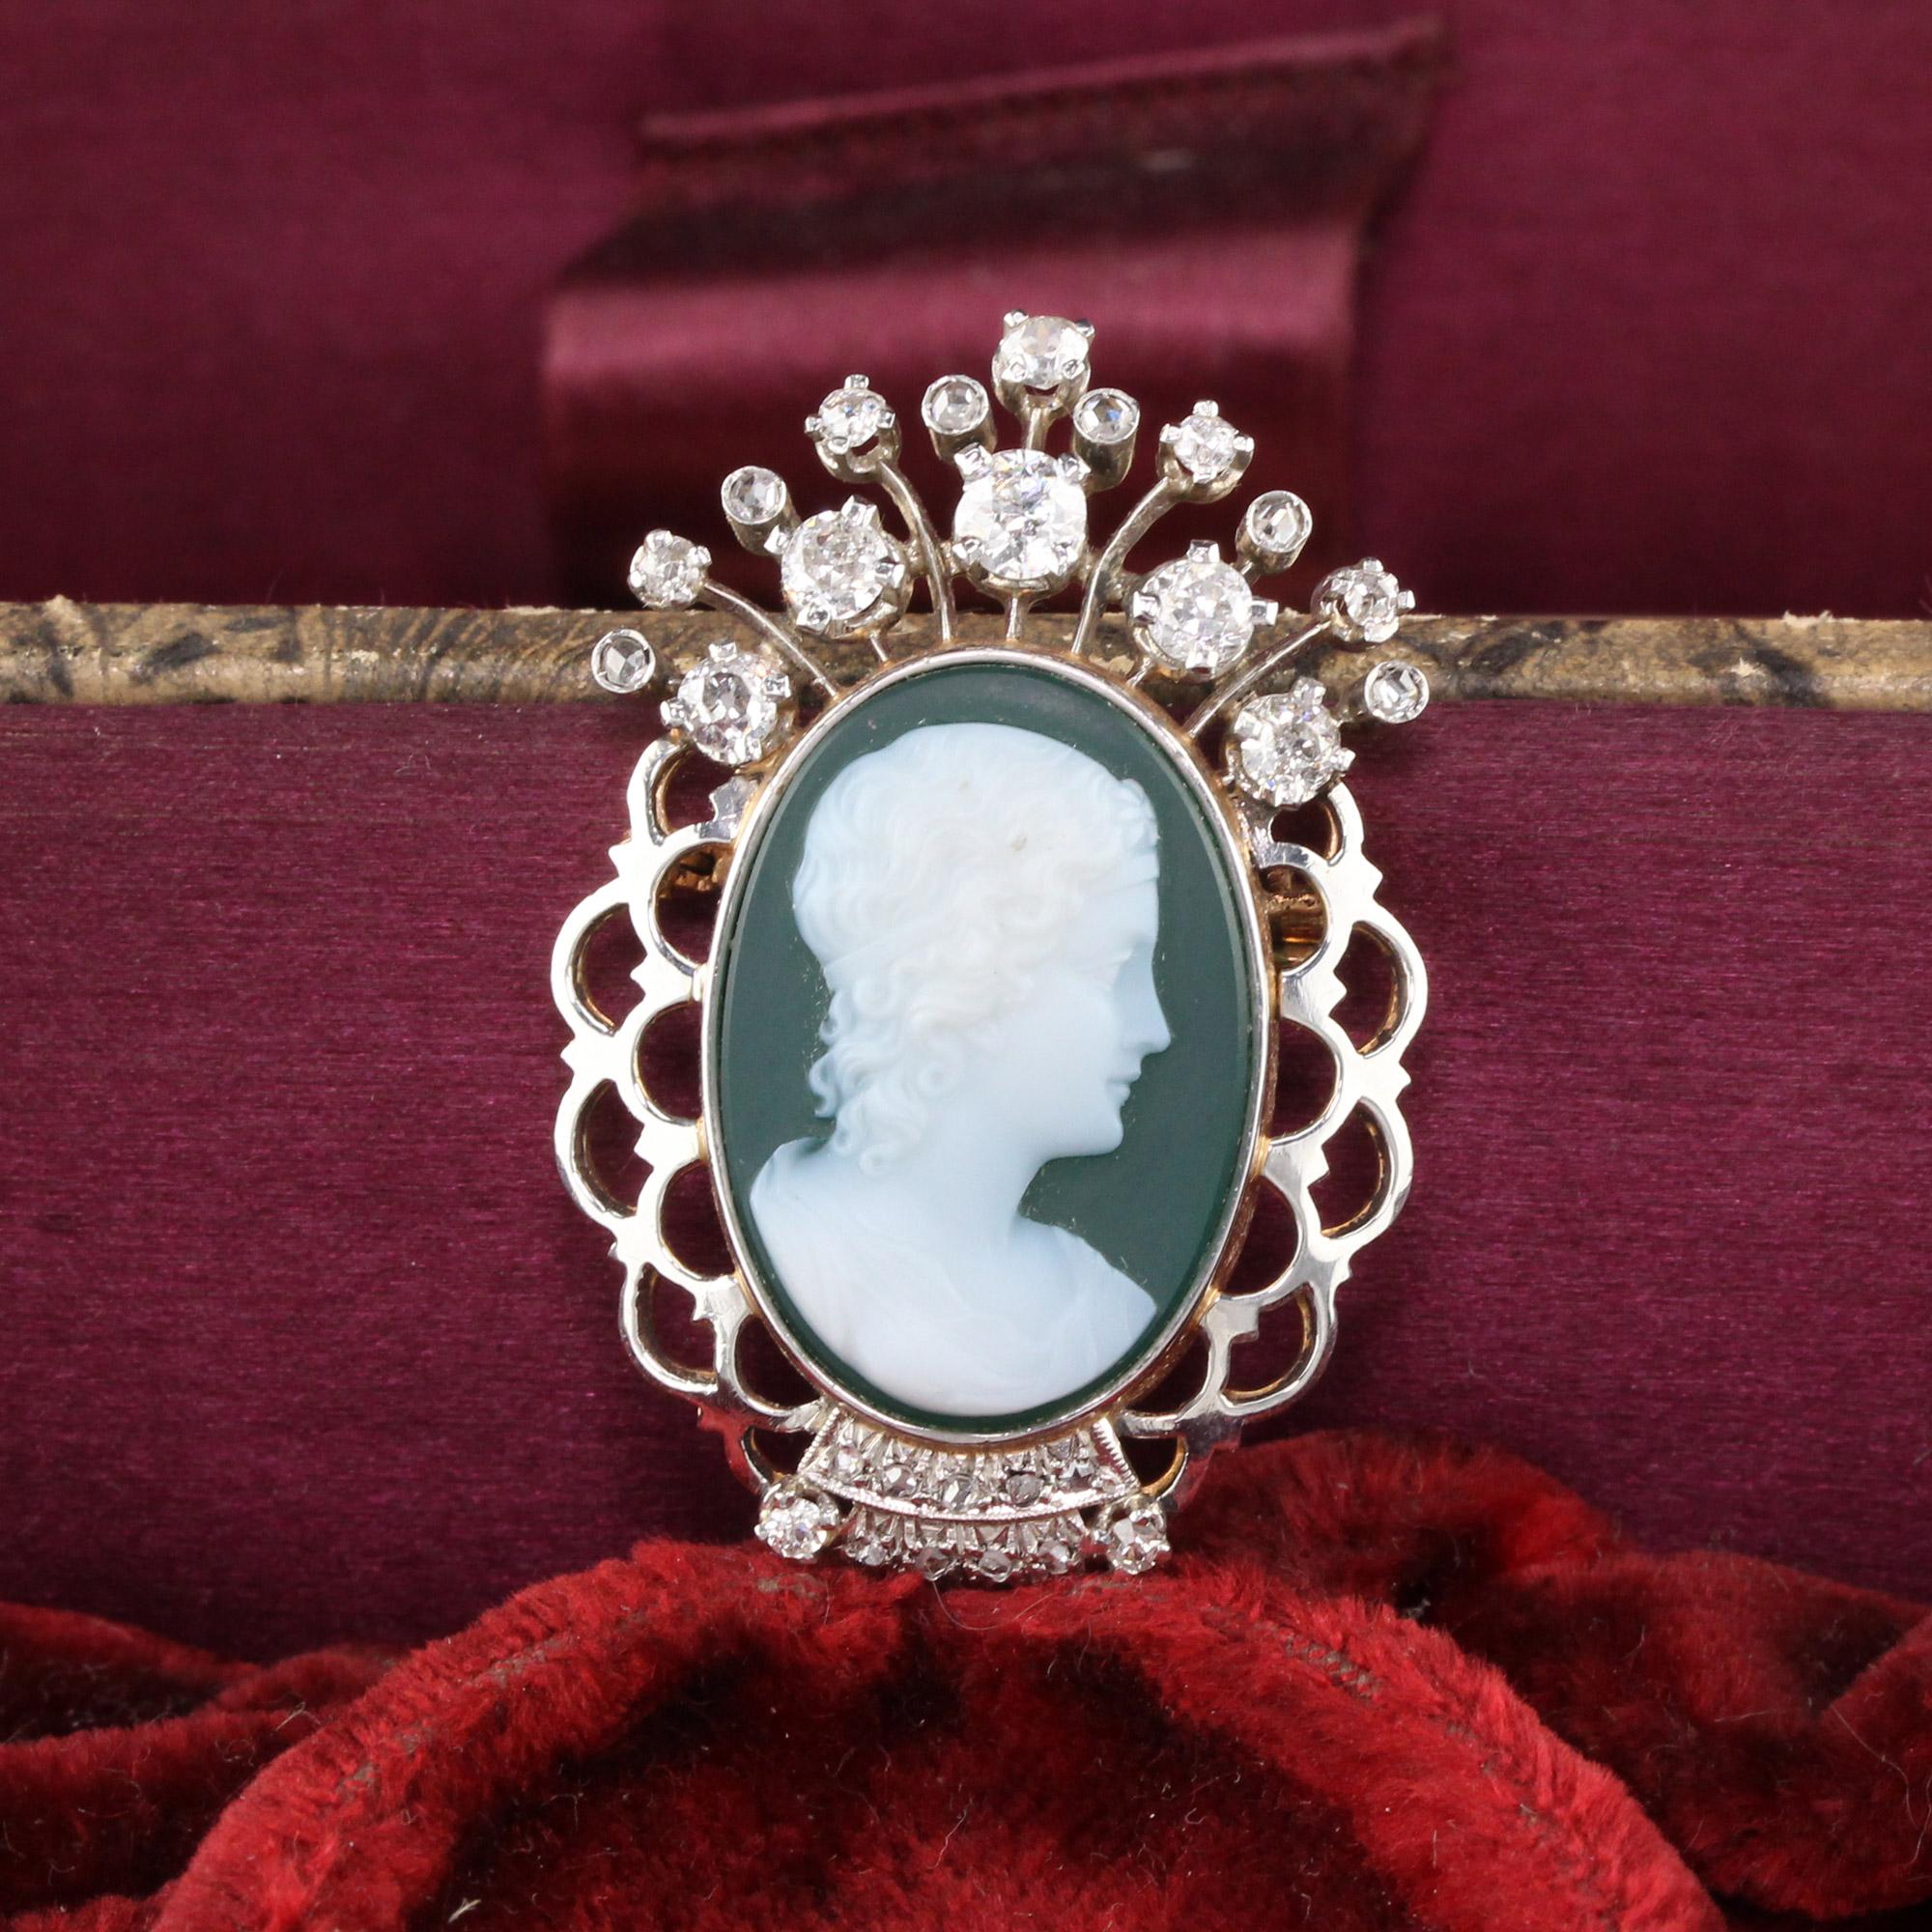 Beautiful & unique vintage platinum and 18K yellow gold brooch with a green and white carved cameo in the center and a diamond 